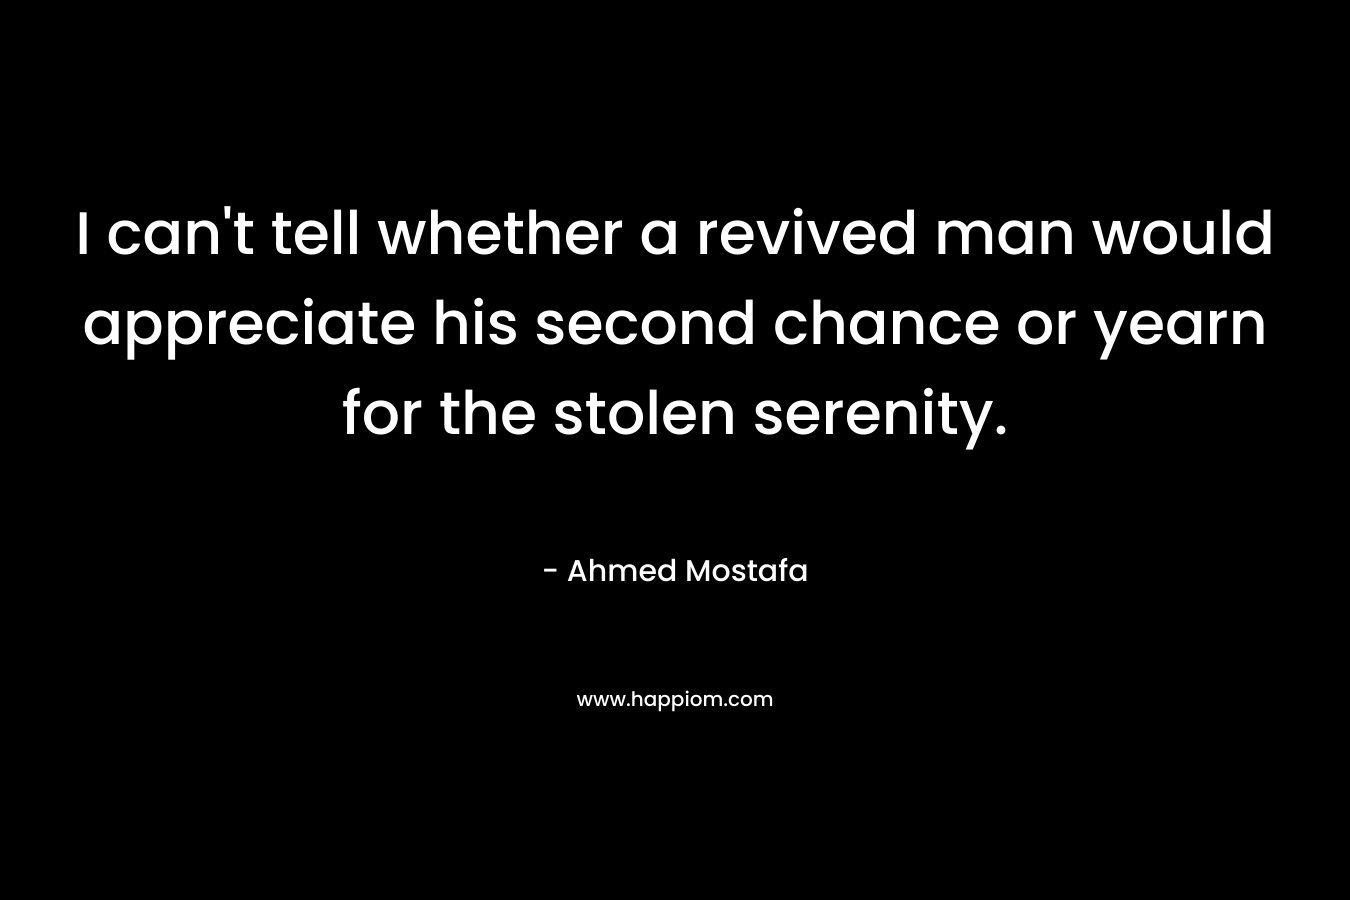 I can’t tell whether a revived man would appreciate his second chance or yearn for the stolen serenity. – Ahmed Mostafa